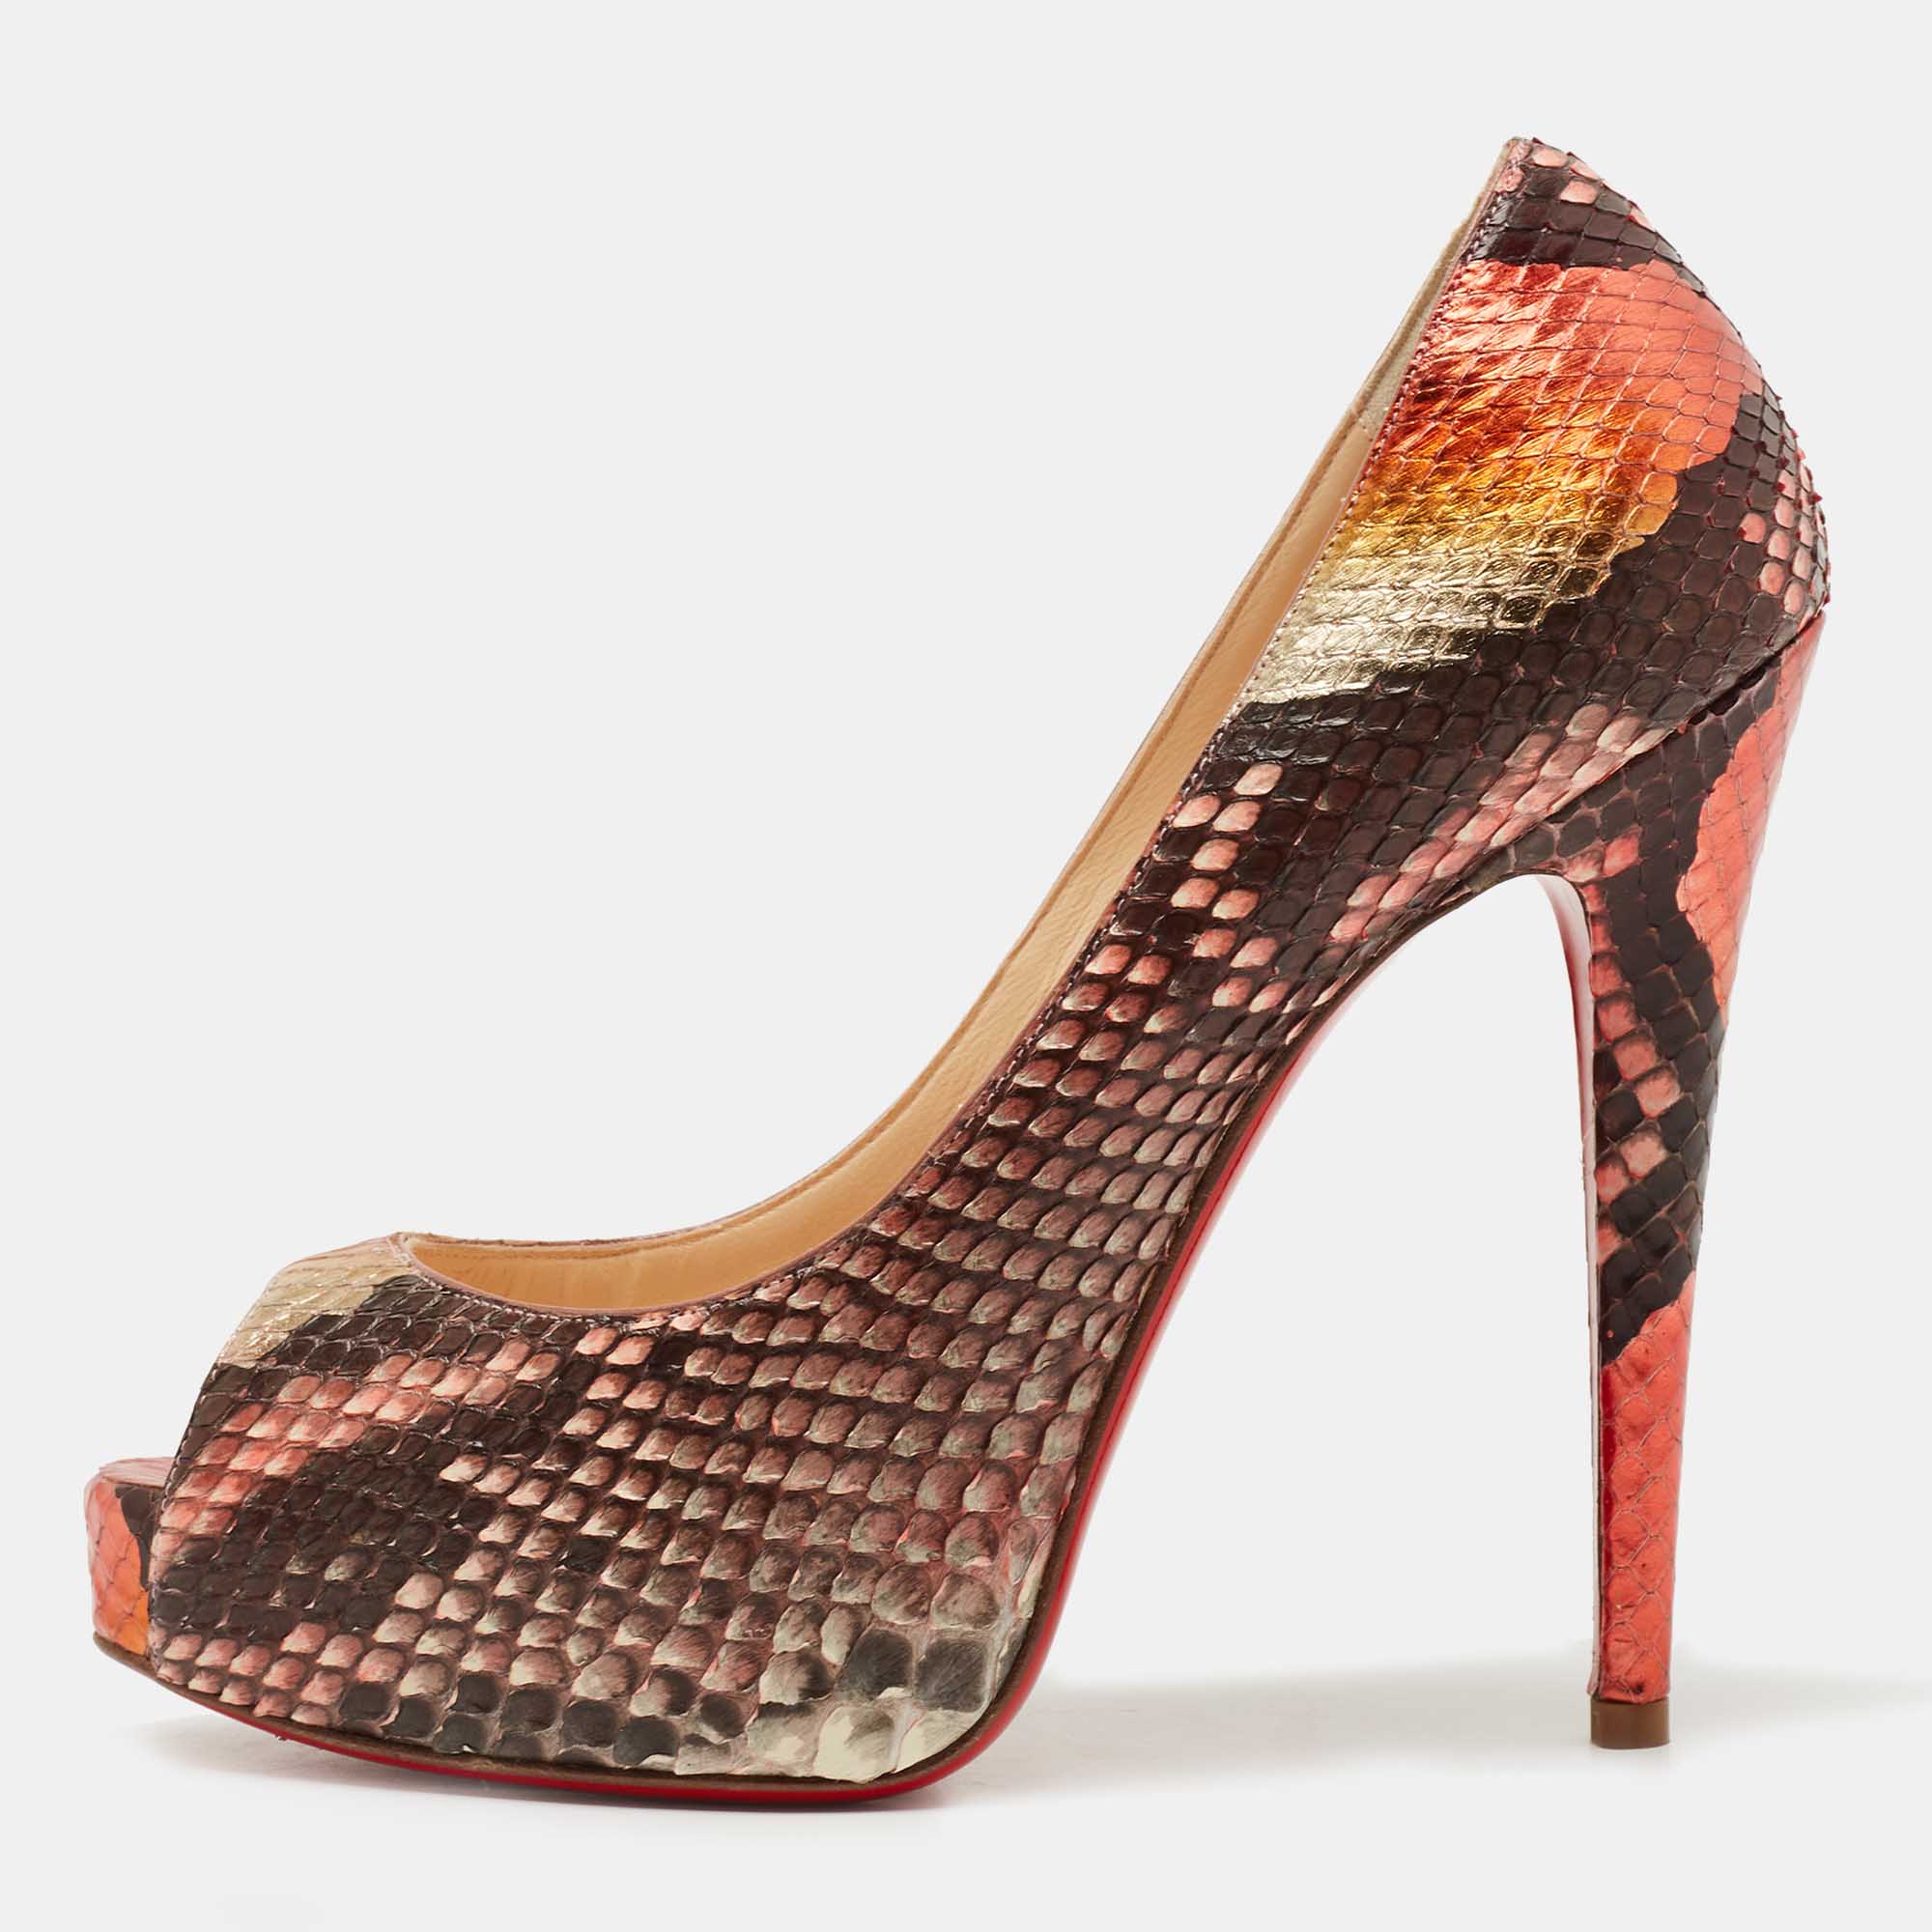 Pre-owned Christian Louboutin Multicolor Python Very Prive Pumps Size 37.5